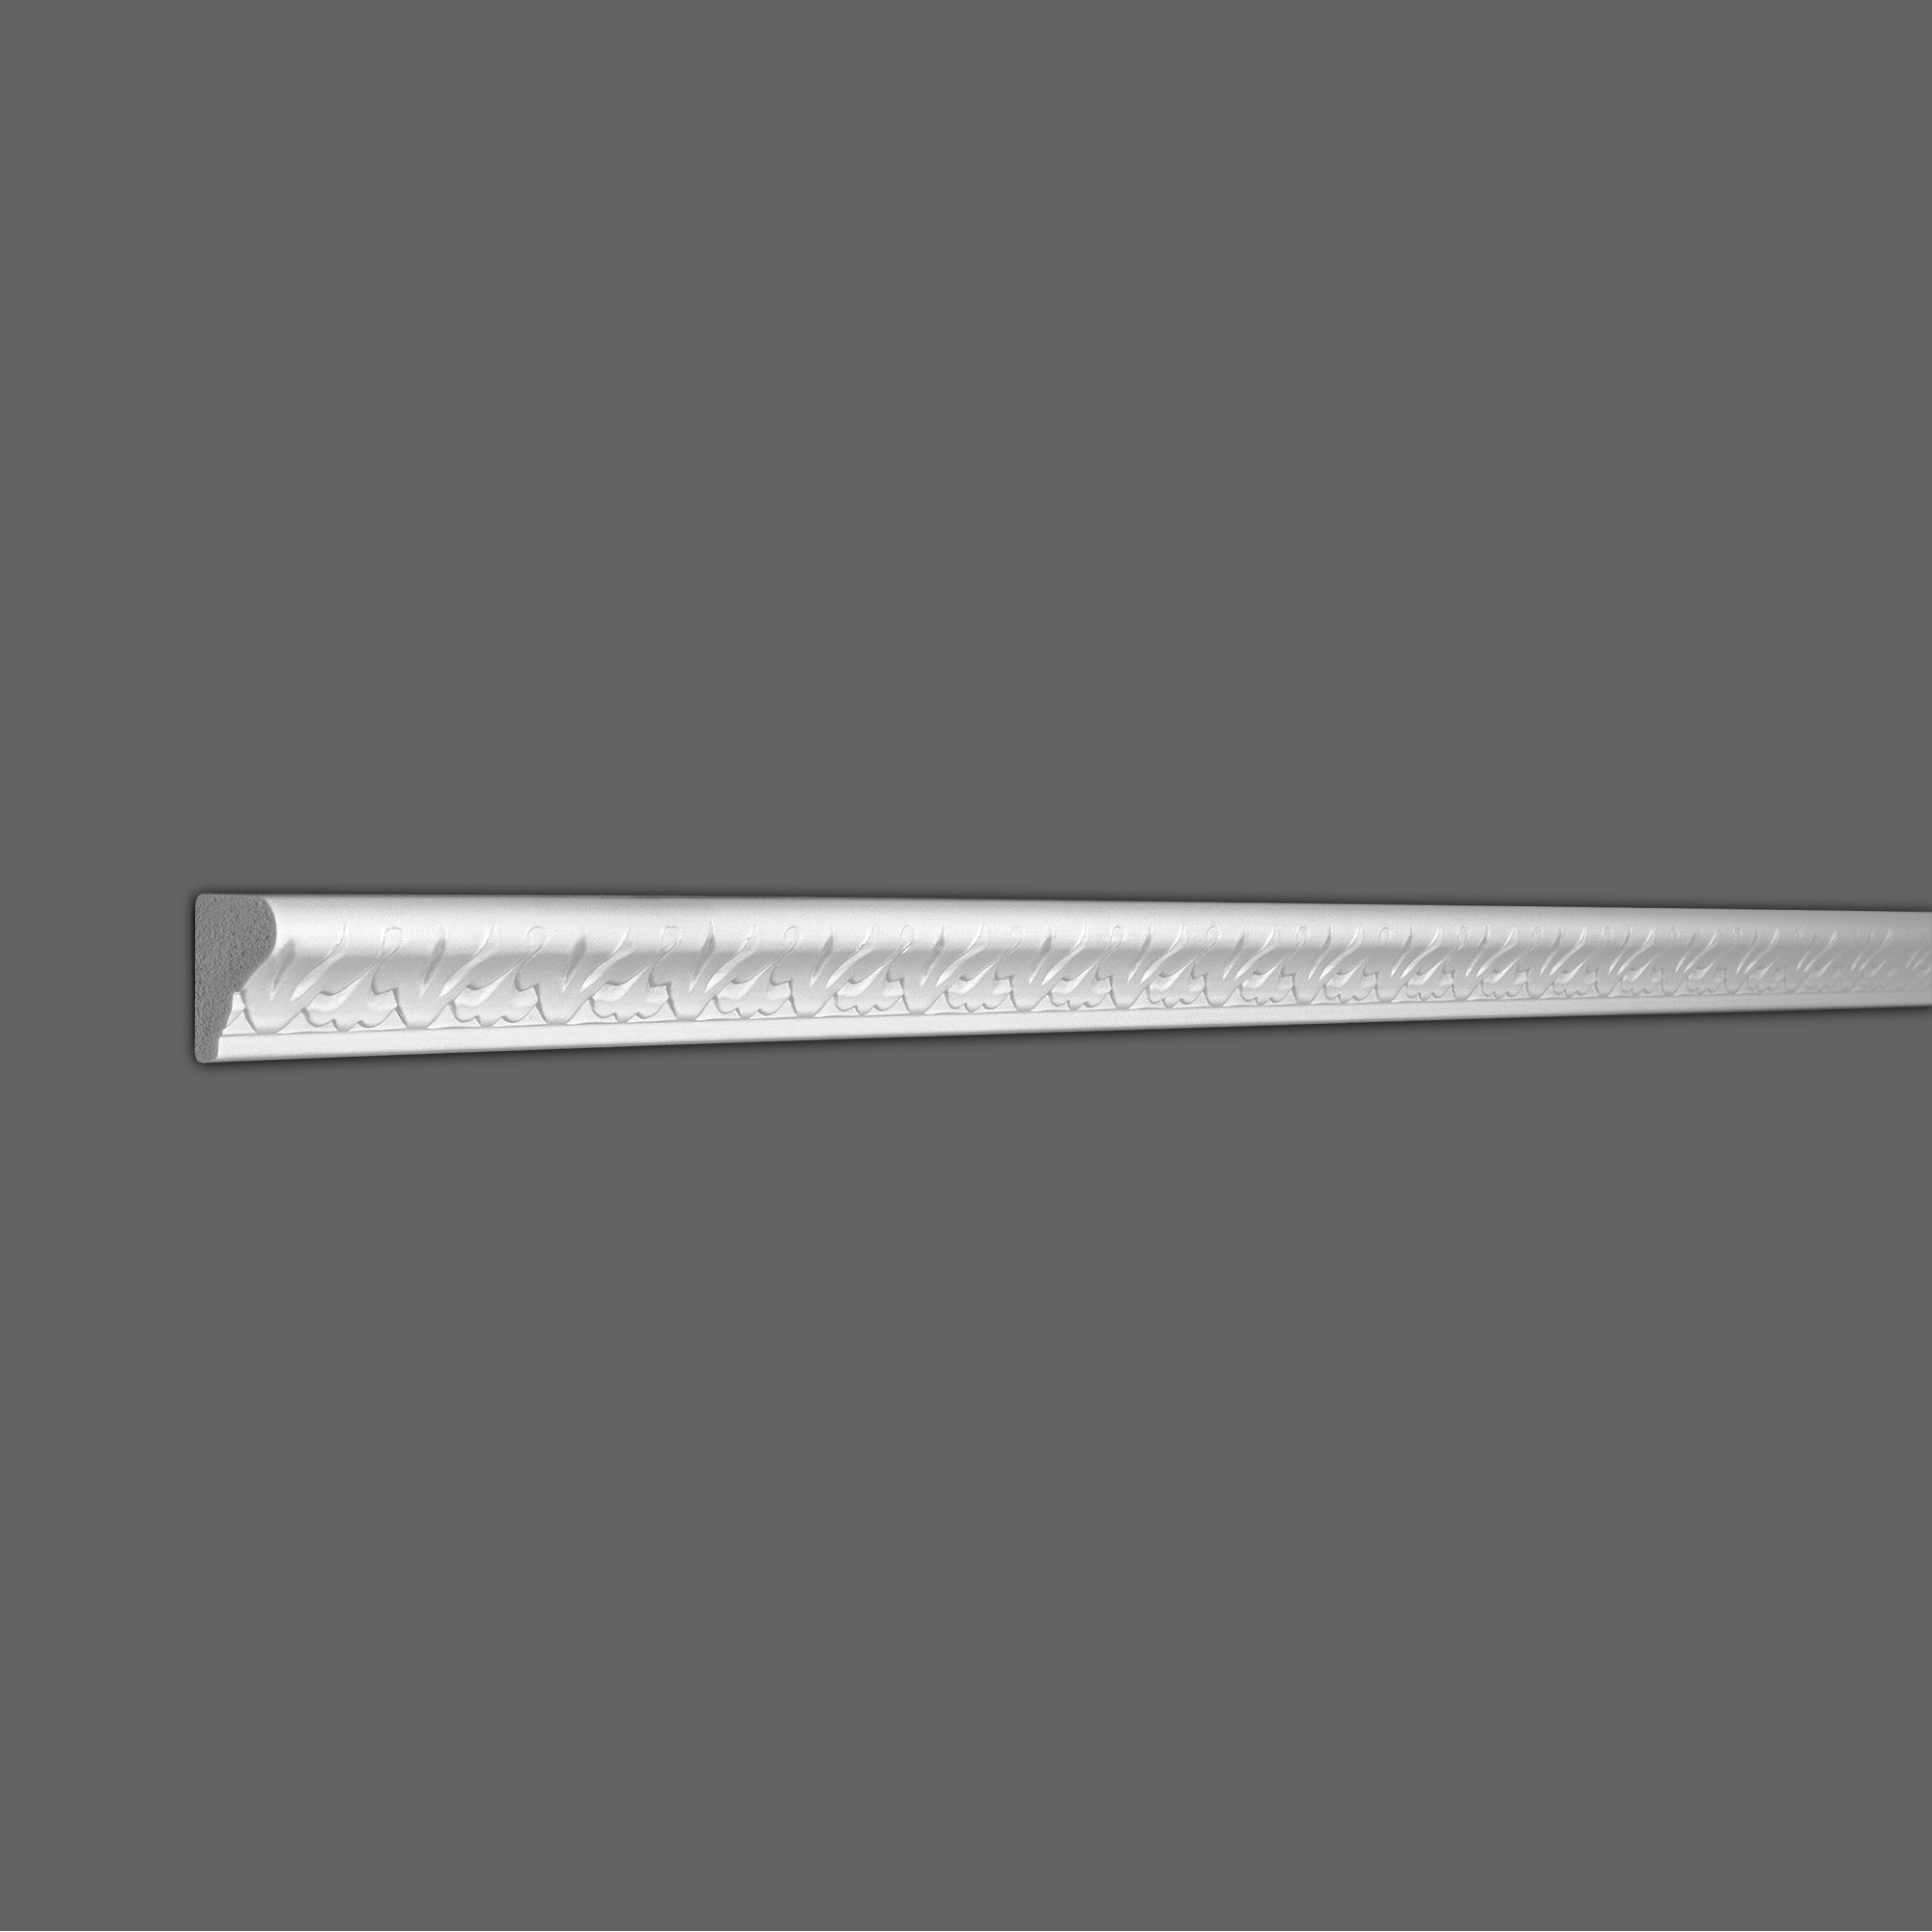 RPS-3307 H: 1-3/8" x Proj: 7/8" x L: 8' x Design Repeat: 2-1/4" Primed White Polymer Panel Moulding (7 Pack/54+Feet) - image 5 of 5